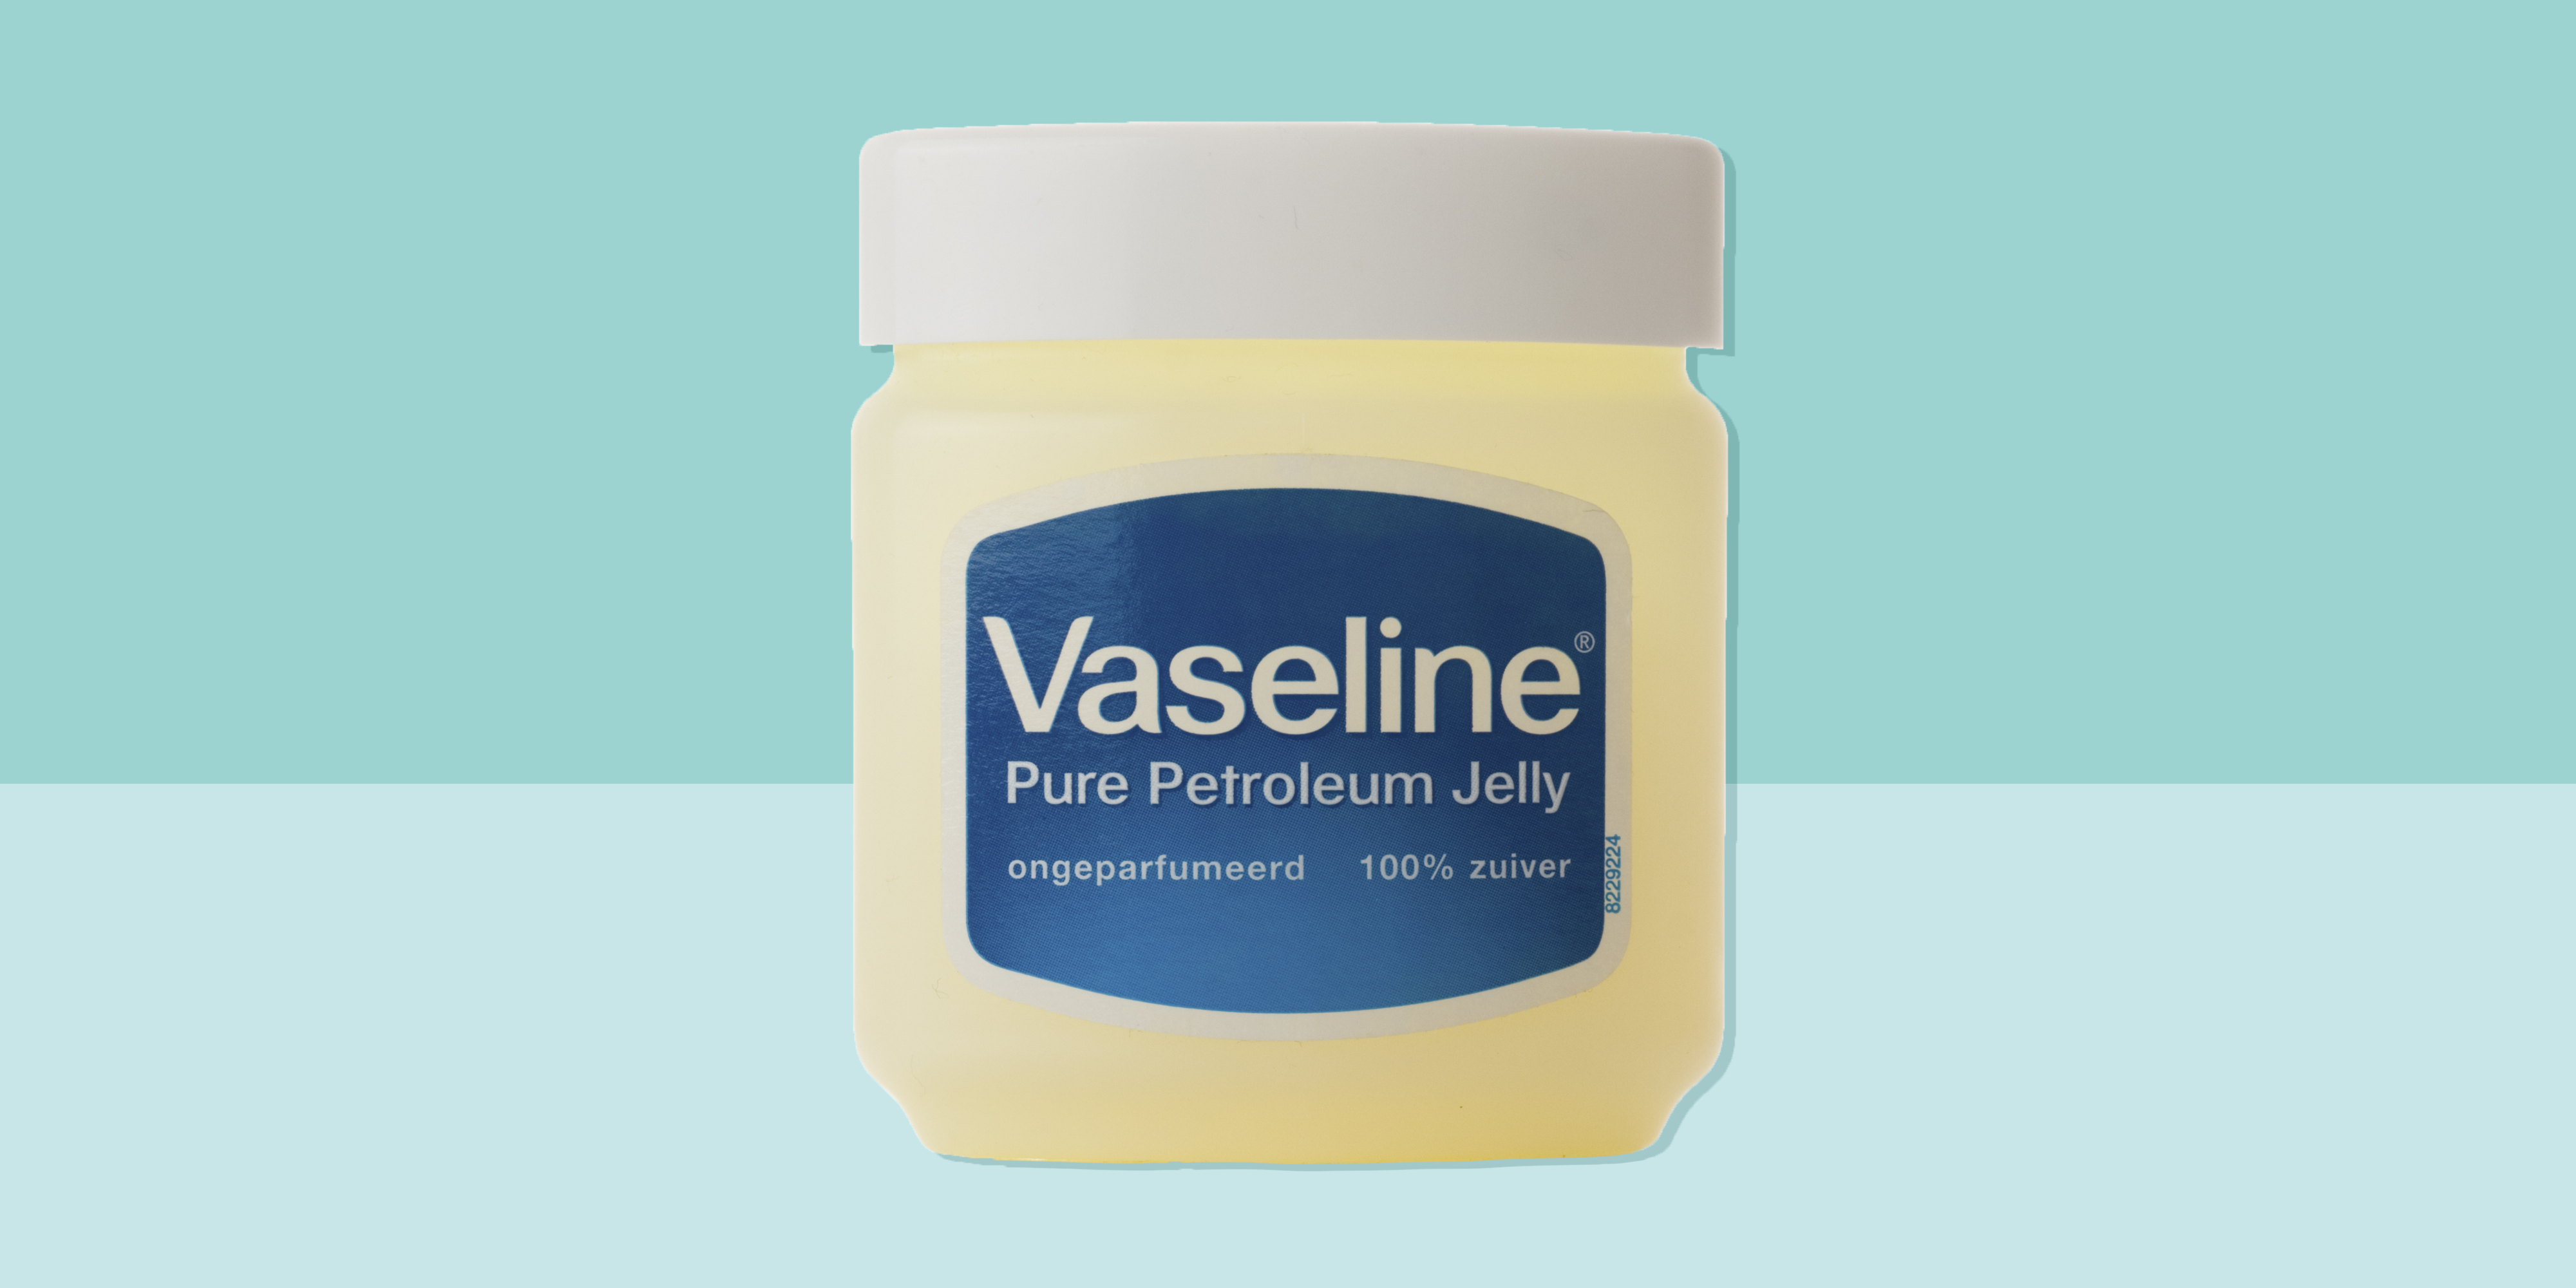 15 Great Vaseline Uses for Skin - Is Petroleum Jelly Good For Your Face?